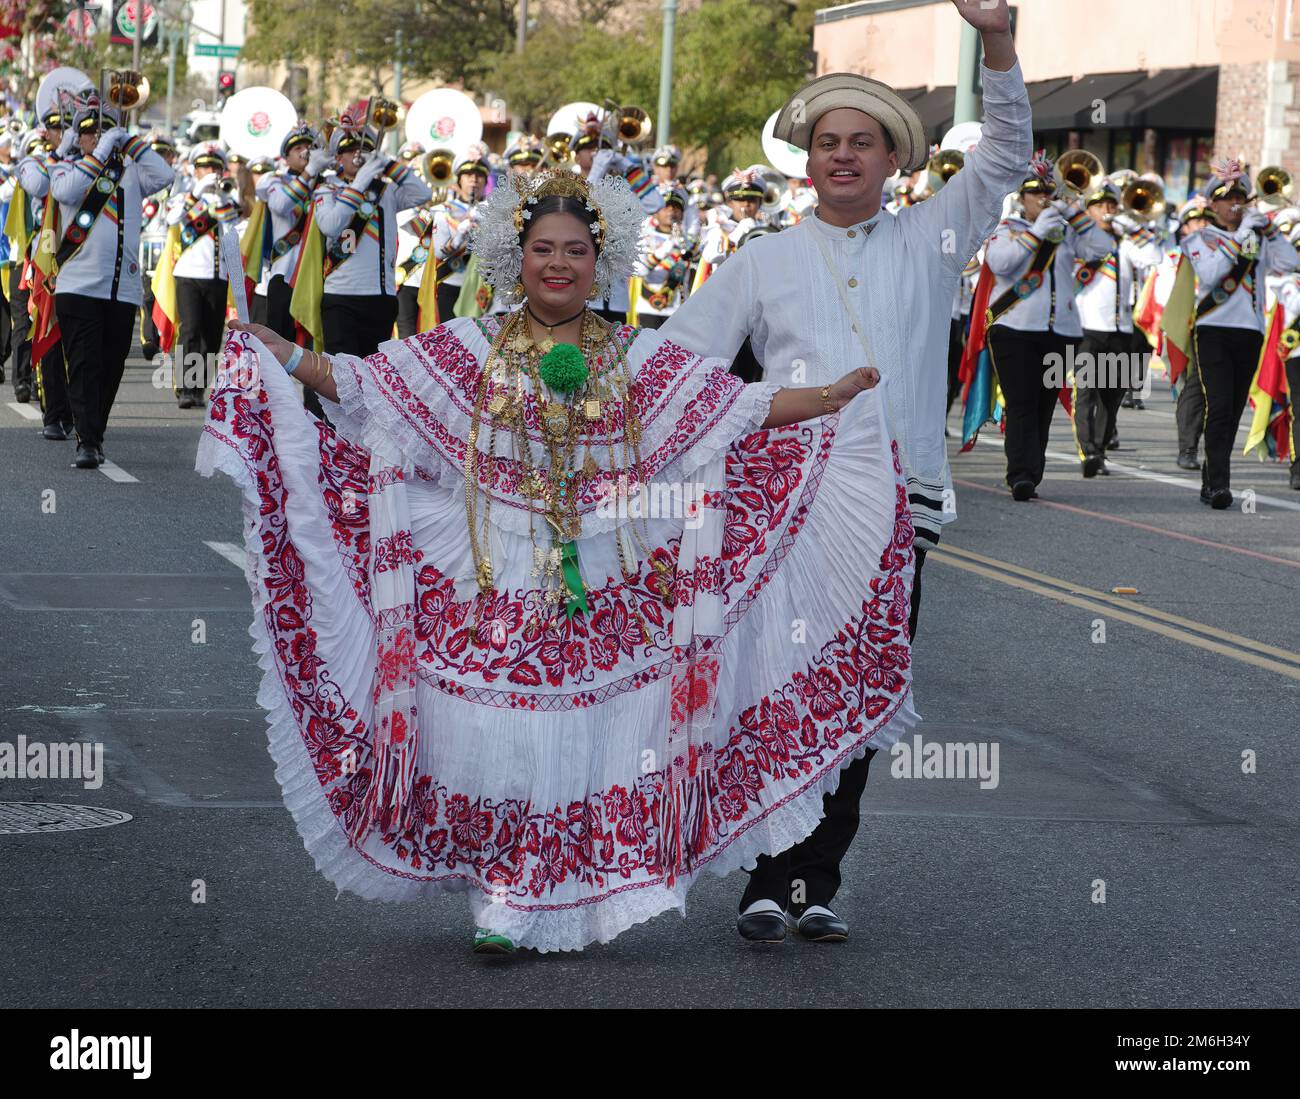 Pasadena, California, United States - January 2, 2023: unidentified young Panamanian dancers wearing traditional costumes and jewlery shown performing Stock Photo